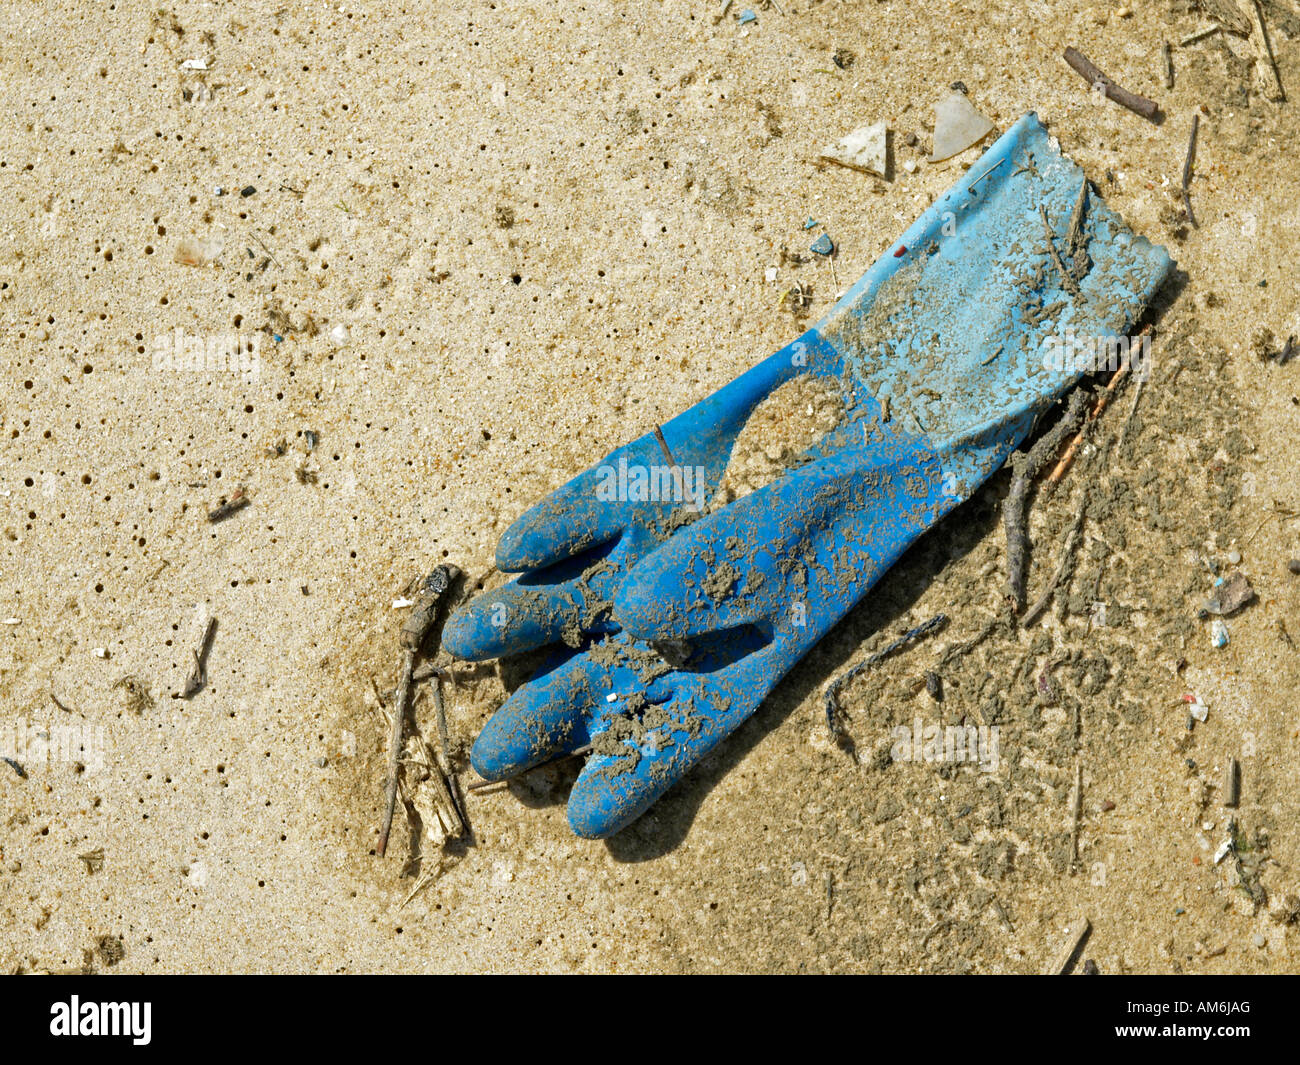 old rubber working glove lying on ground on sand Stock Photo